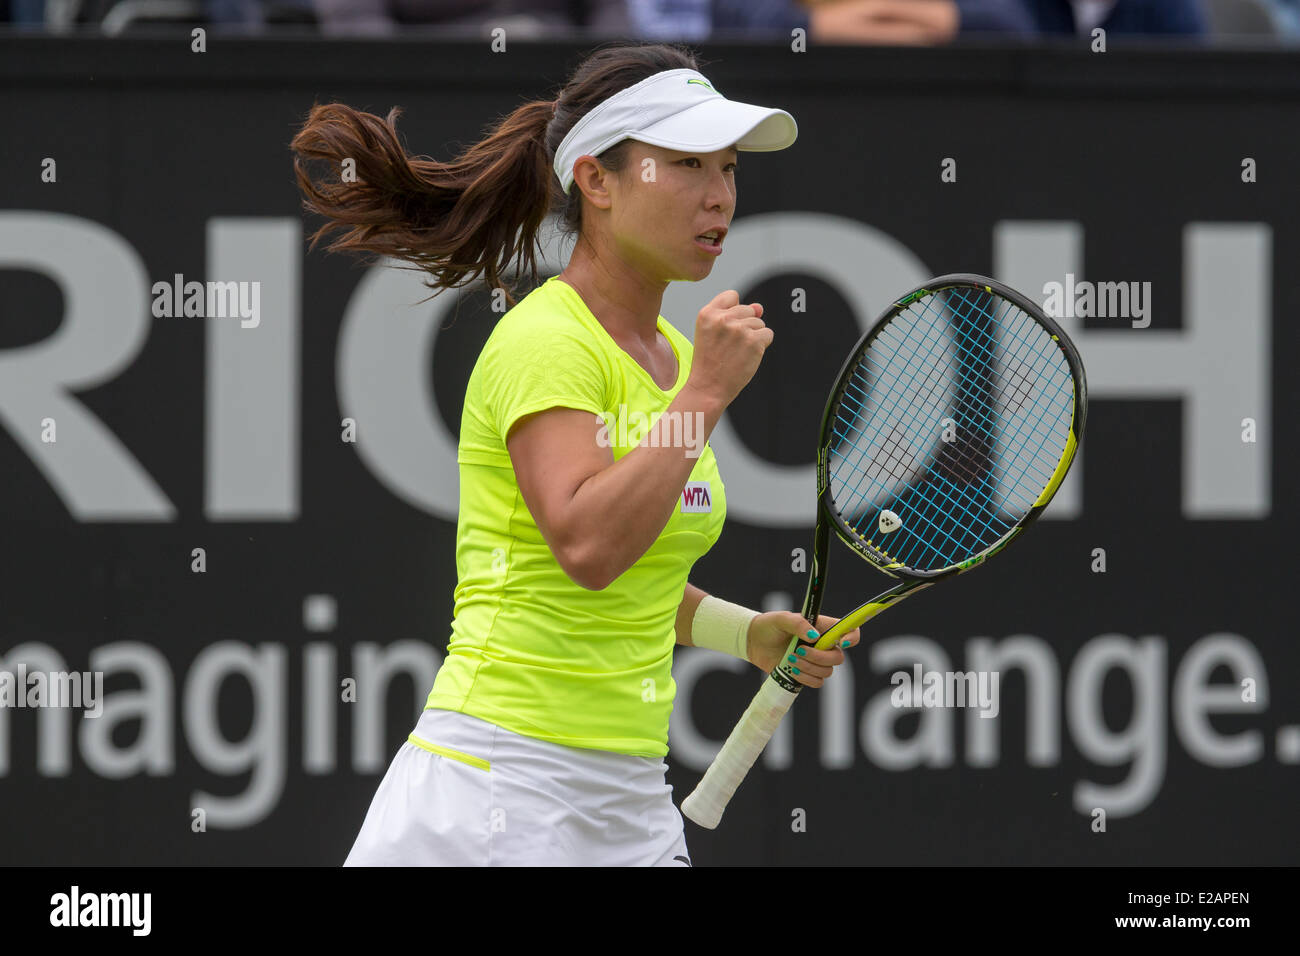 Chinese tennis player Jie Zheng reacts during the 2nd round singles match of the Topshelf Open 2014 at Autotron, Rosmalen, Netherlands on 18.06.2014. She won against Carla Suarez Navarro (ESP) who had to retire at 7:5 0:1 due to back problems. Photo: International-Sport-Photos Stock Photo